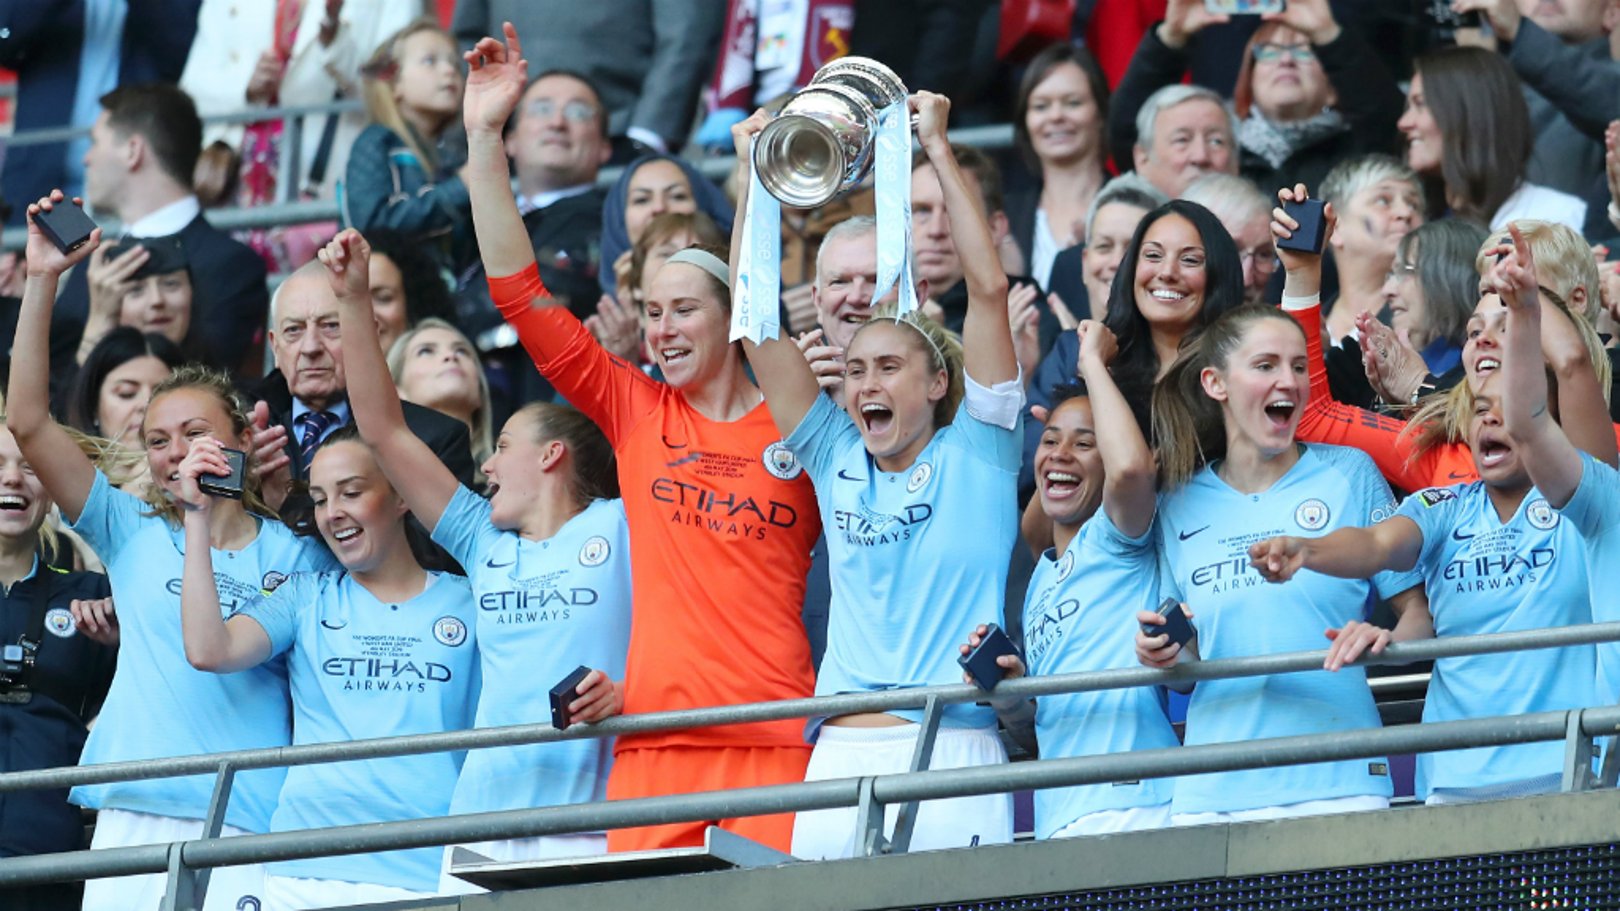 UP FOR THE CUP: Skipper Steph Houghton hoists the FA Cup aloft